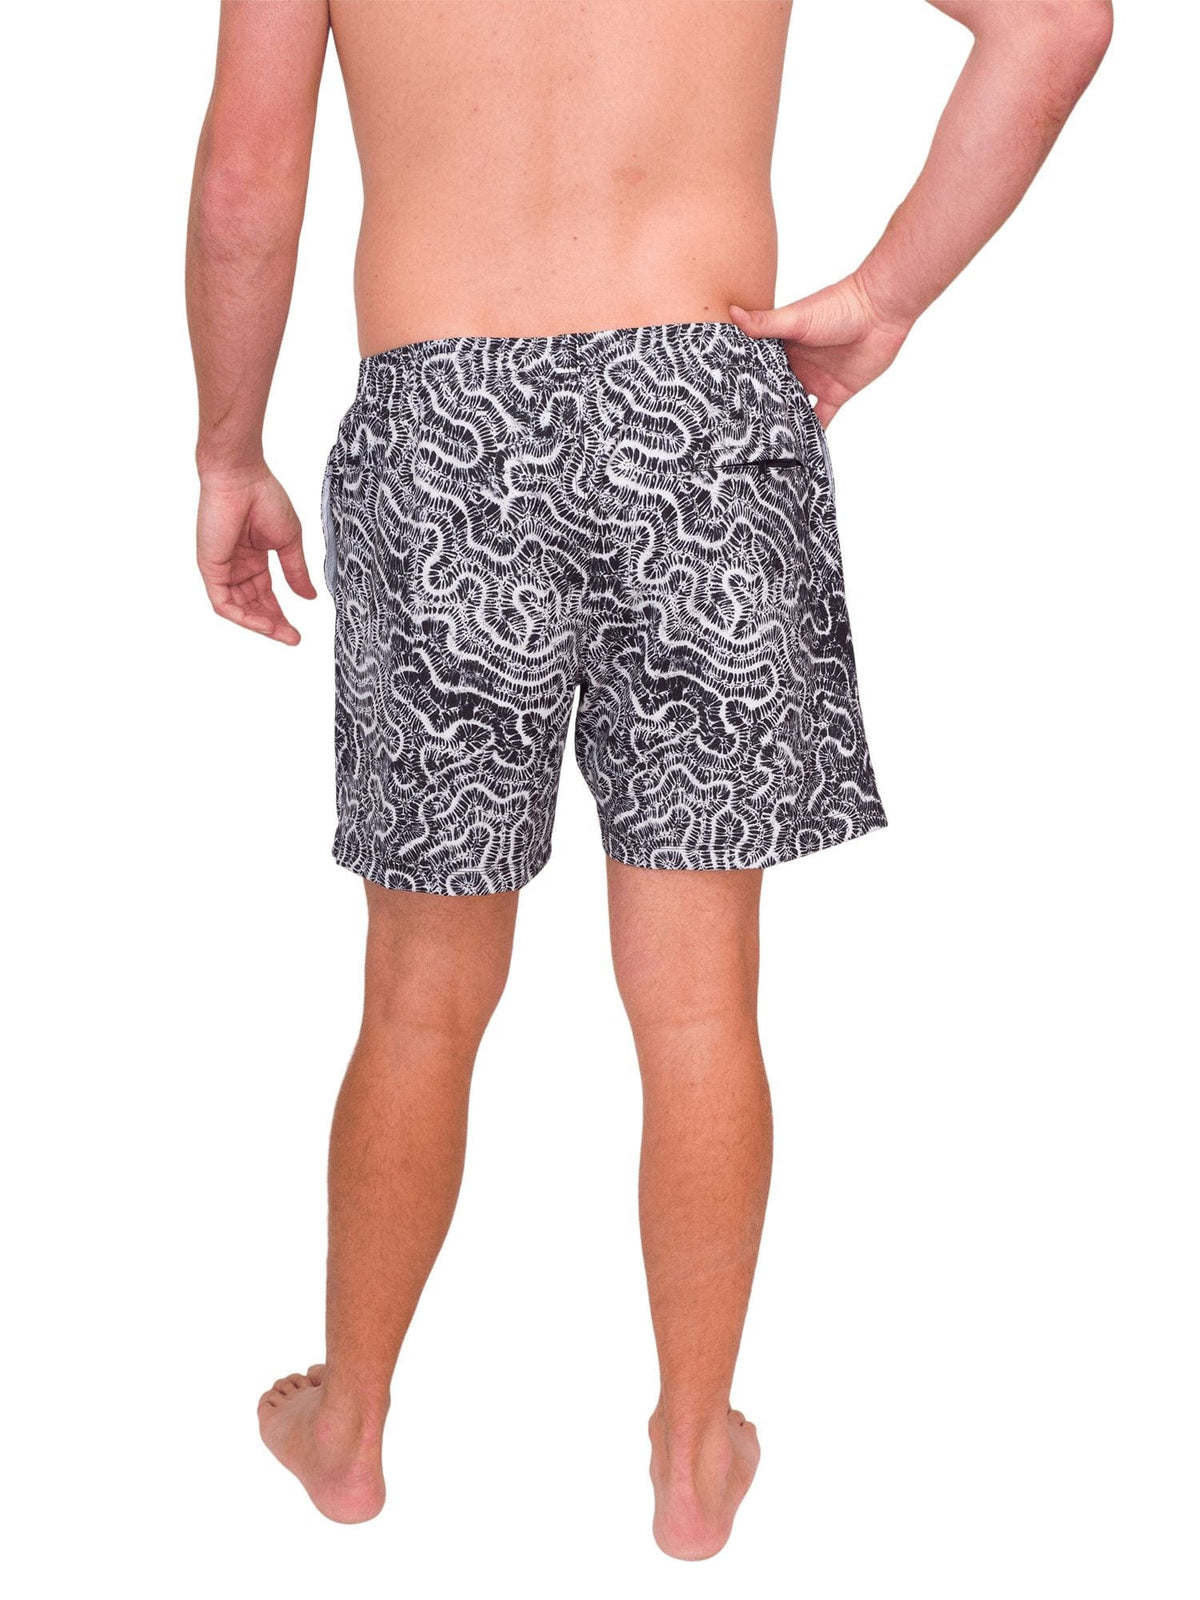 Model: Dalton is a coral biologist who studies the relationship between communities and reef ecosystems. He is 6&#39;3&quot;, 200lbs, and is wearing a size XL. 